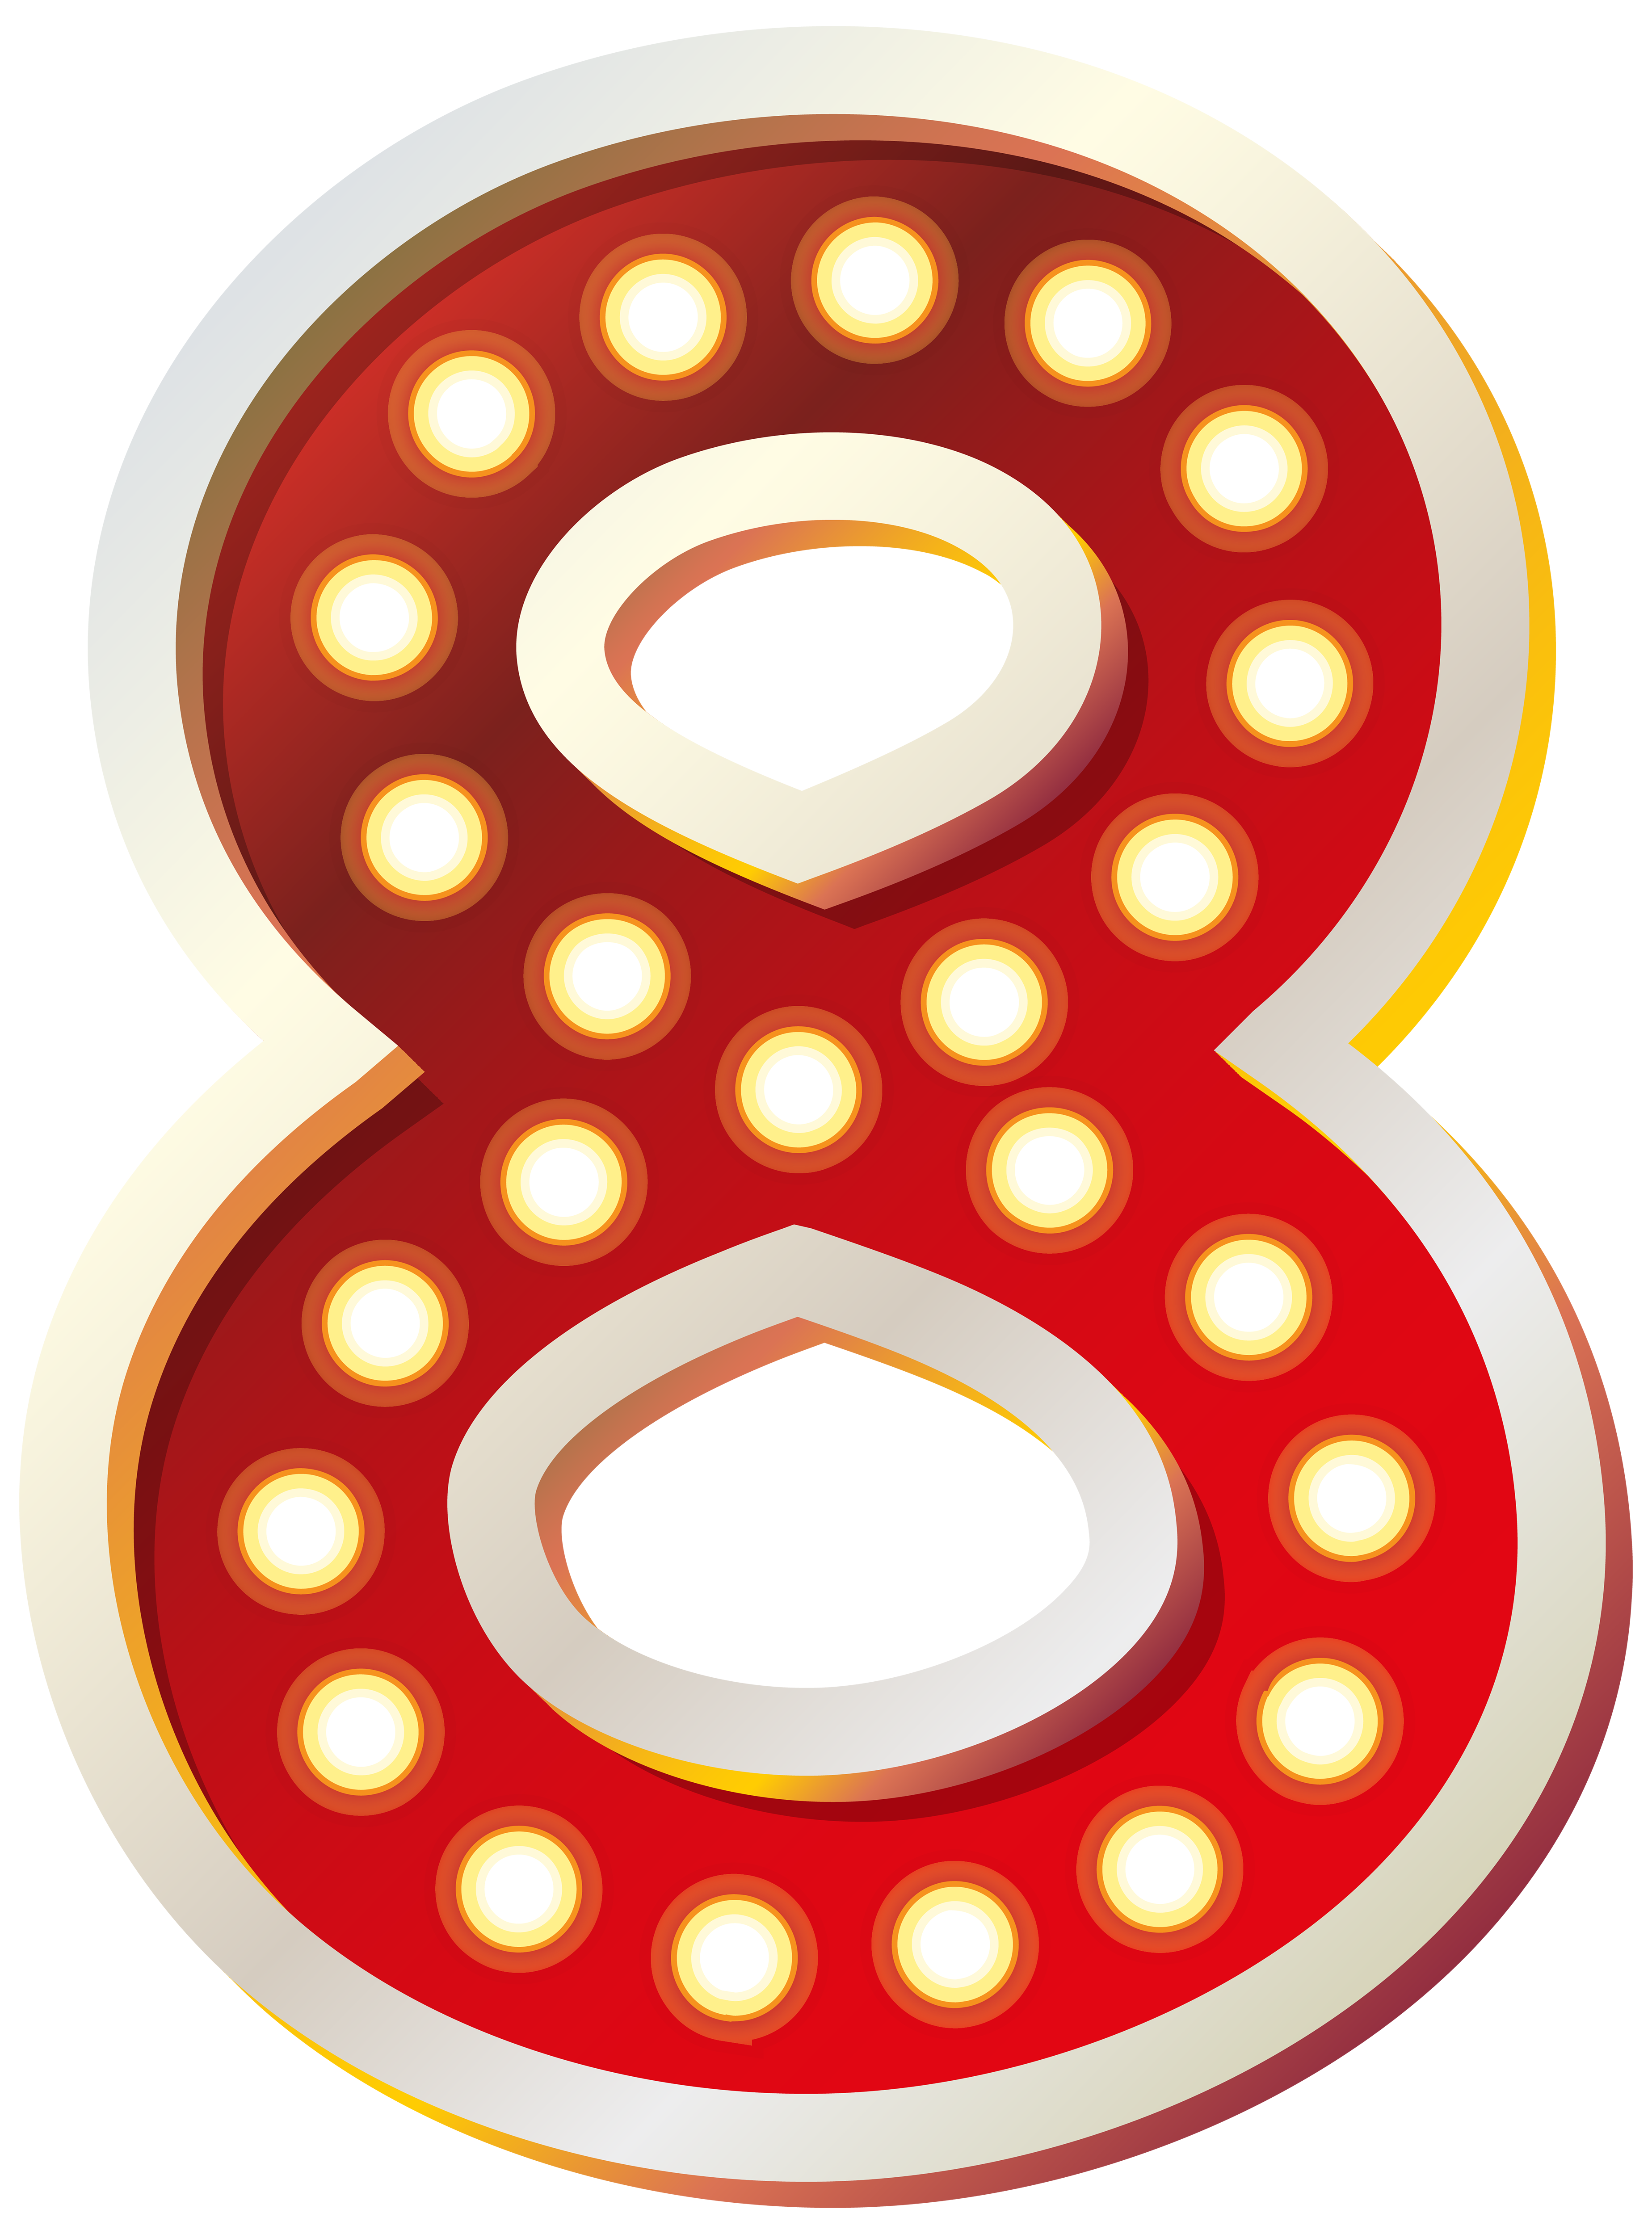 red-number-eight-with-lights-png-clip-art-image-gallery-yopriceville